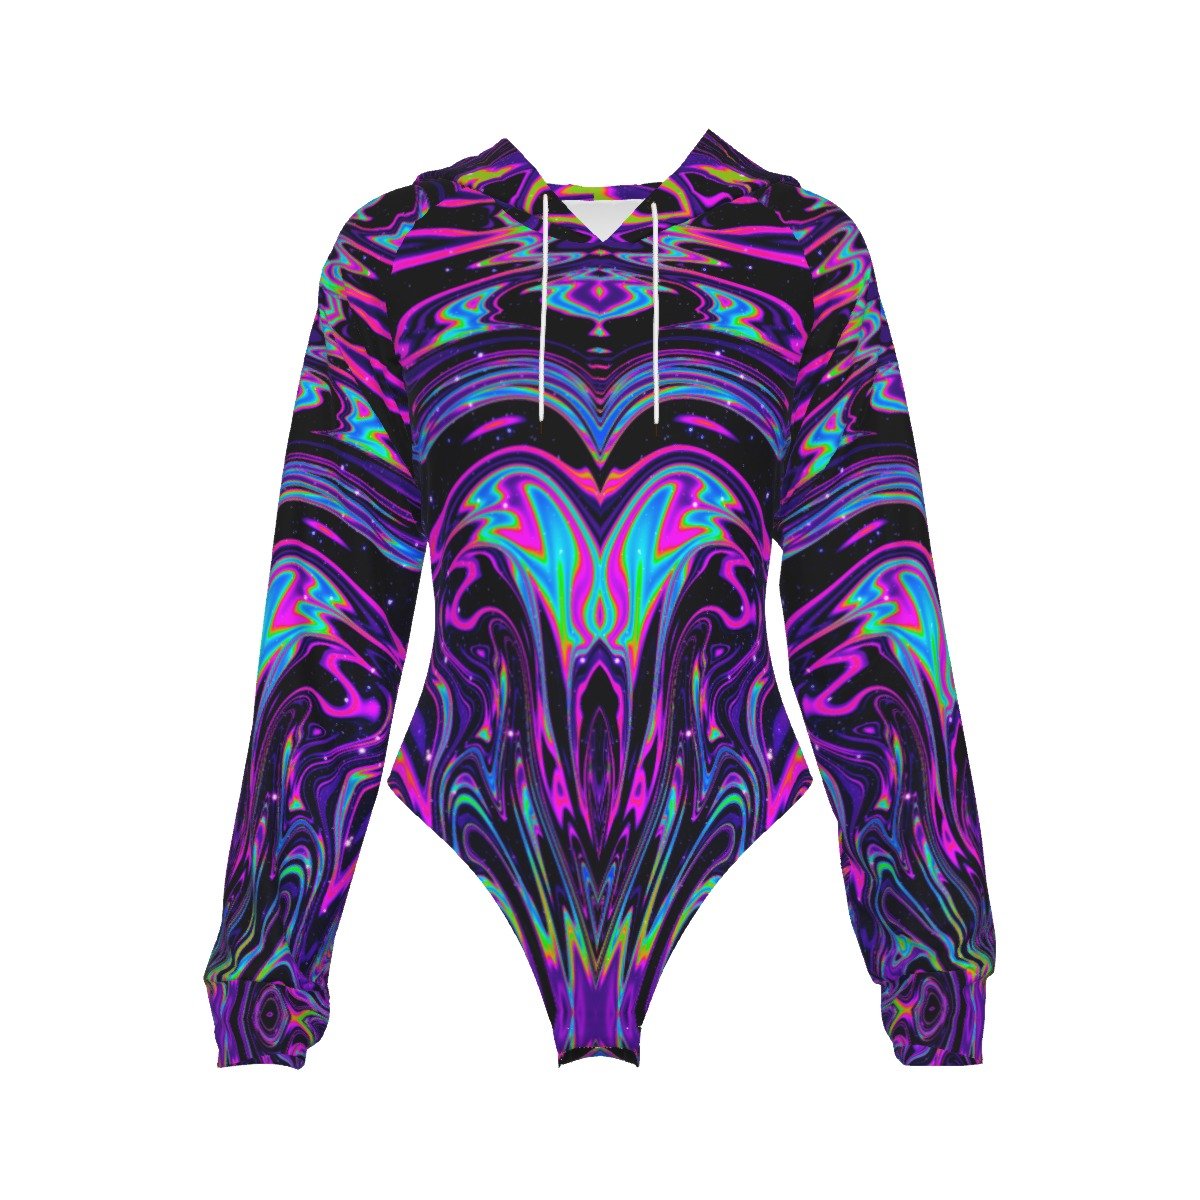 Trippy Festival Hooded Bodysuit with Long Sleeves - BeExtra! Apparel & More